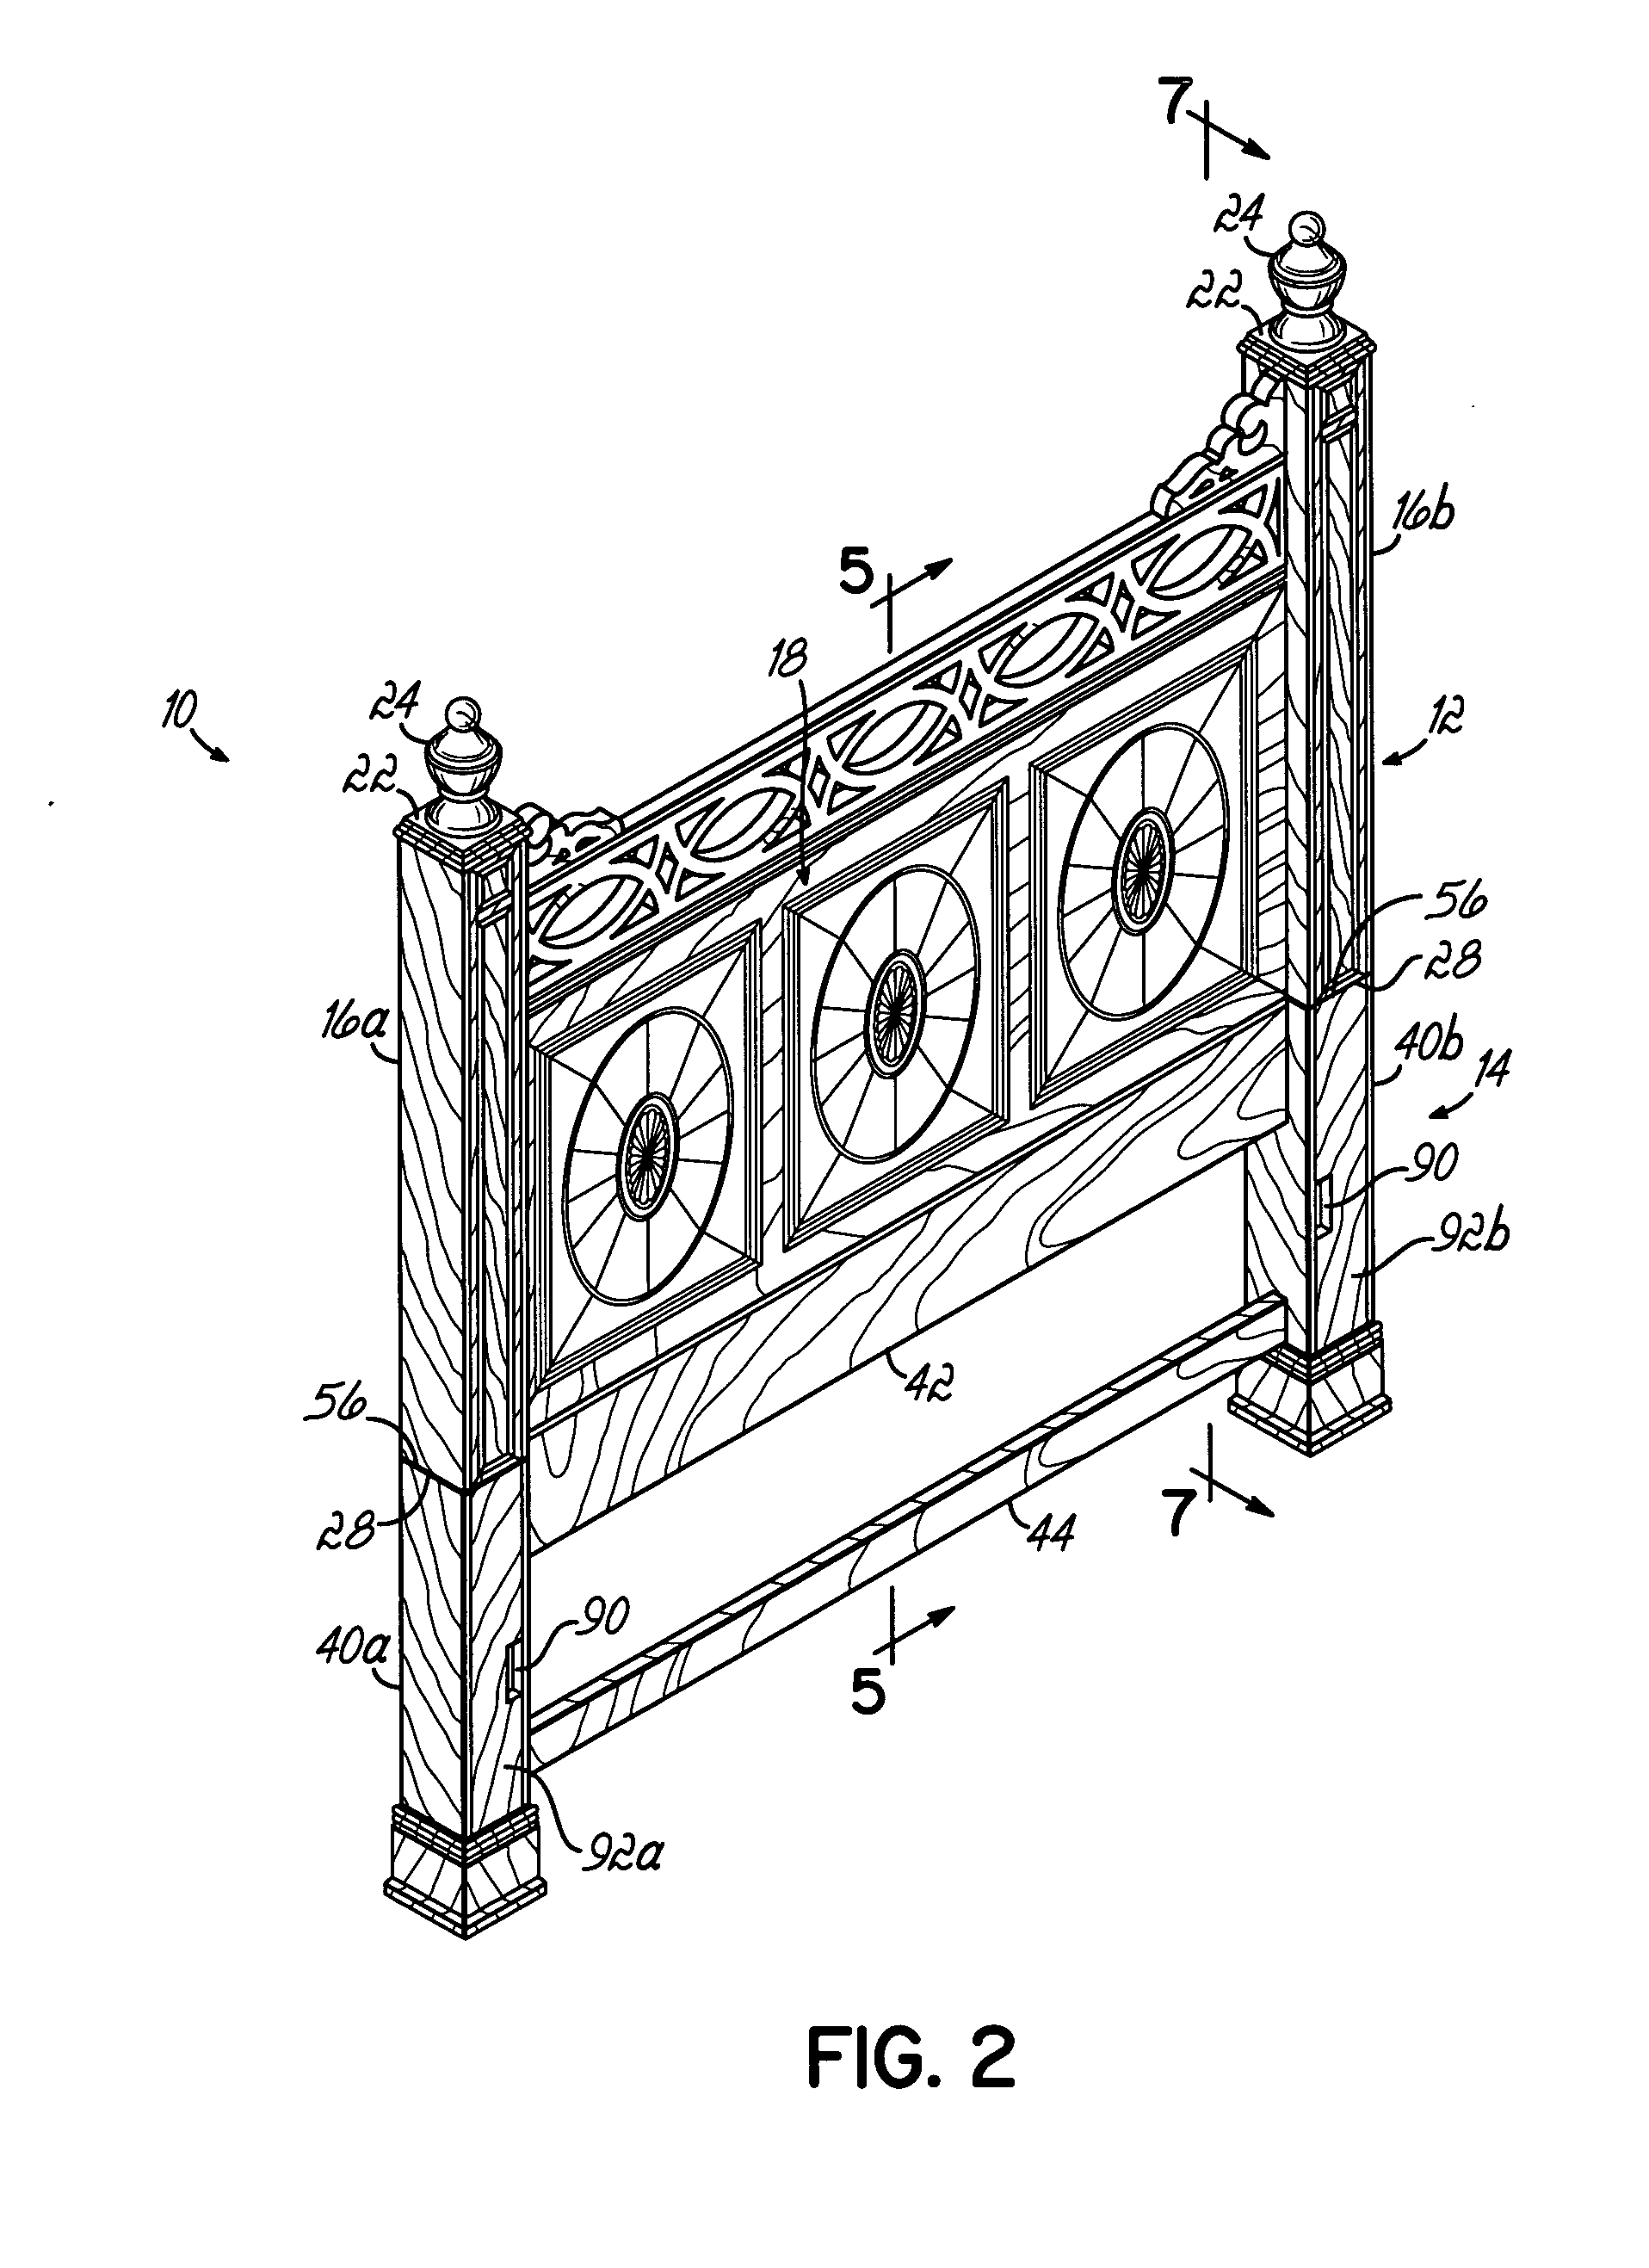 Modular headboard and method of assembly